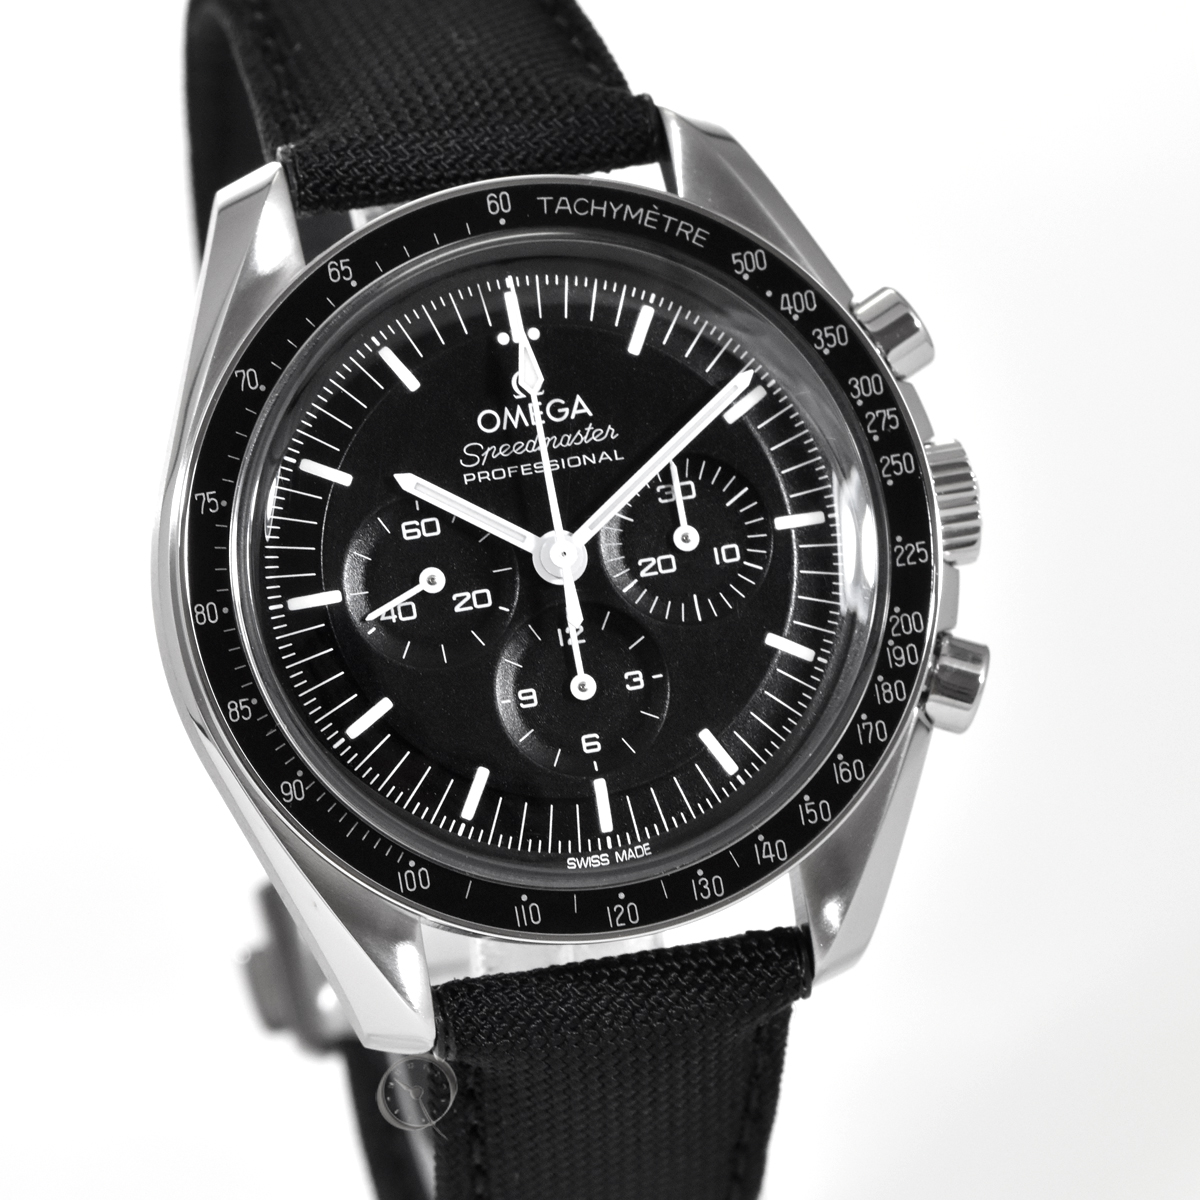 Omega Speedmaster Moonwatch Professional Co-Axial Master Chronometer Chronograph Ref. 310.32.42.50.01.001